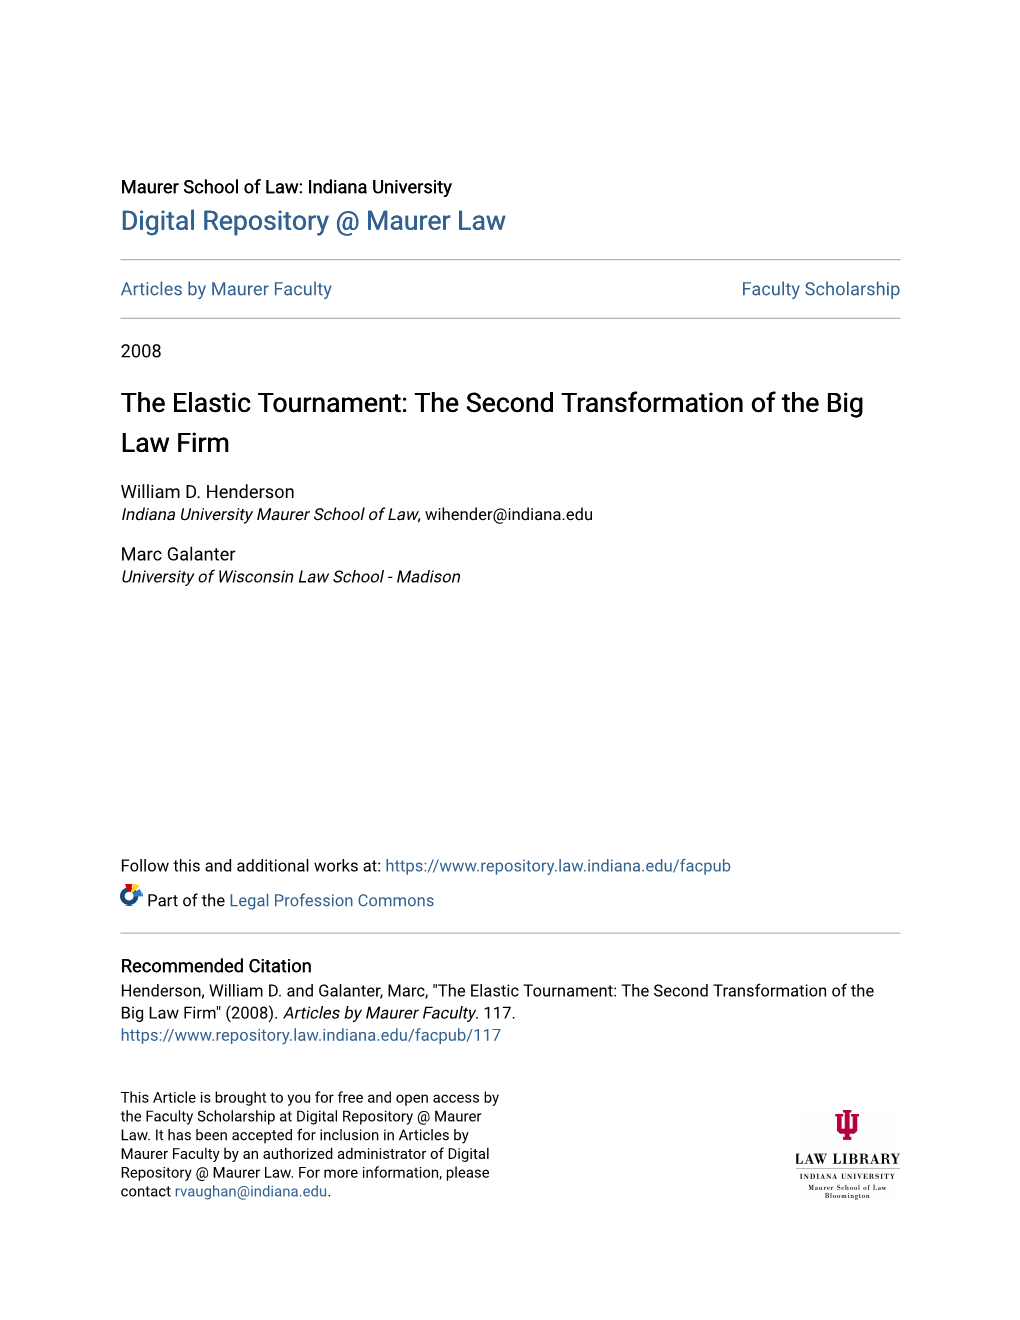 The Elastic Tournament: the Second Transformation of the Big Law Firm